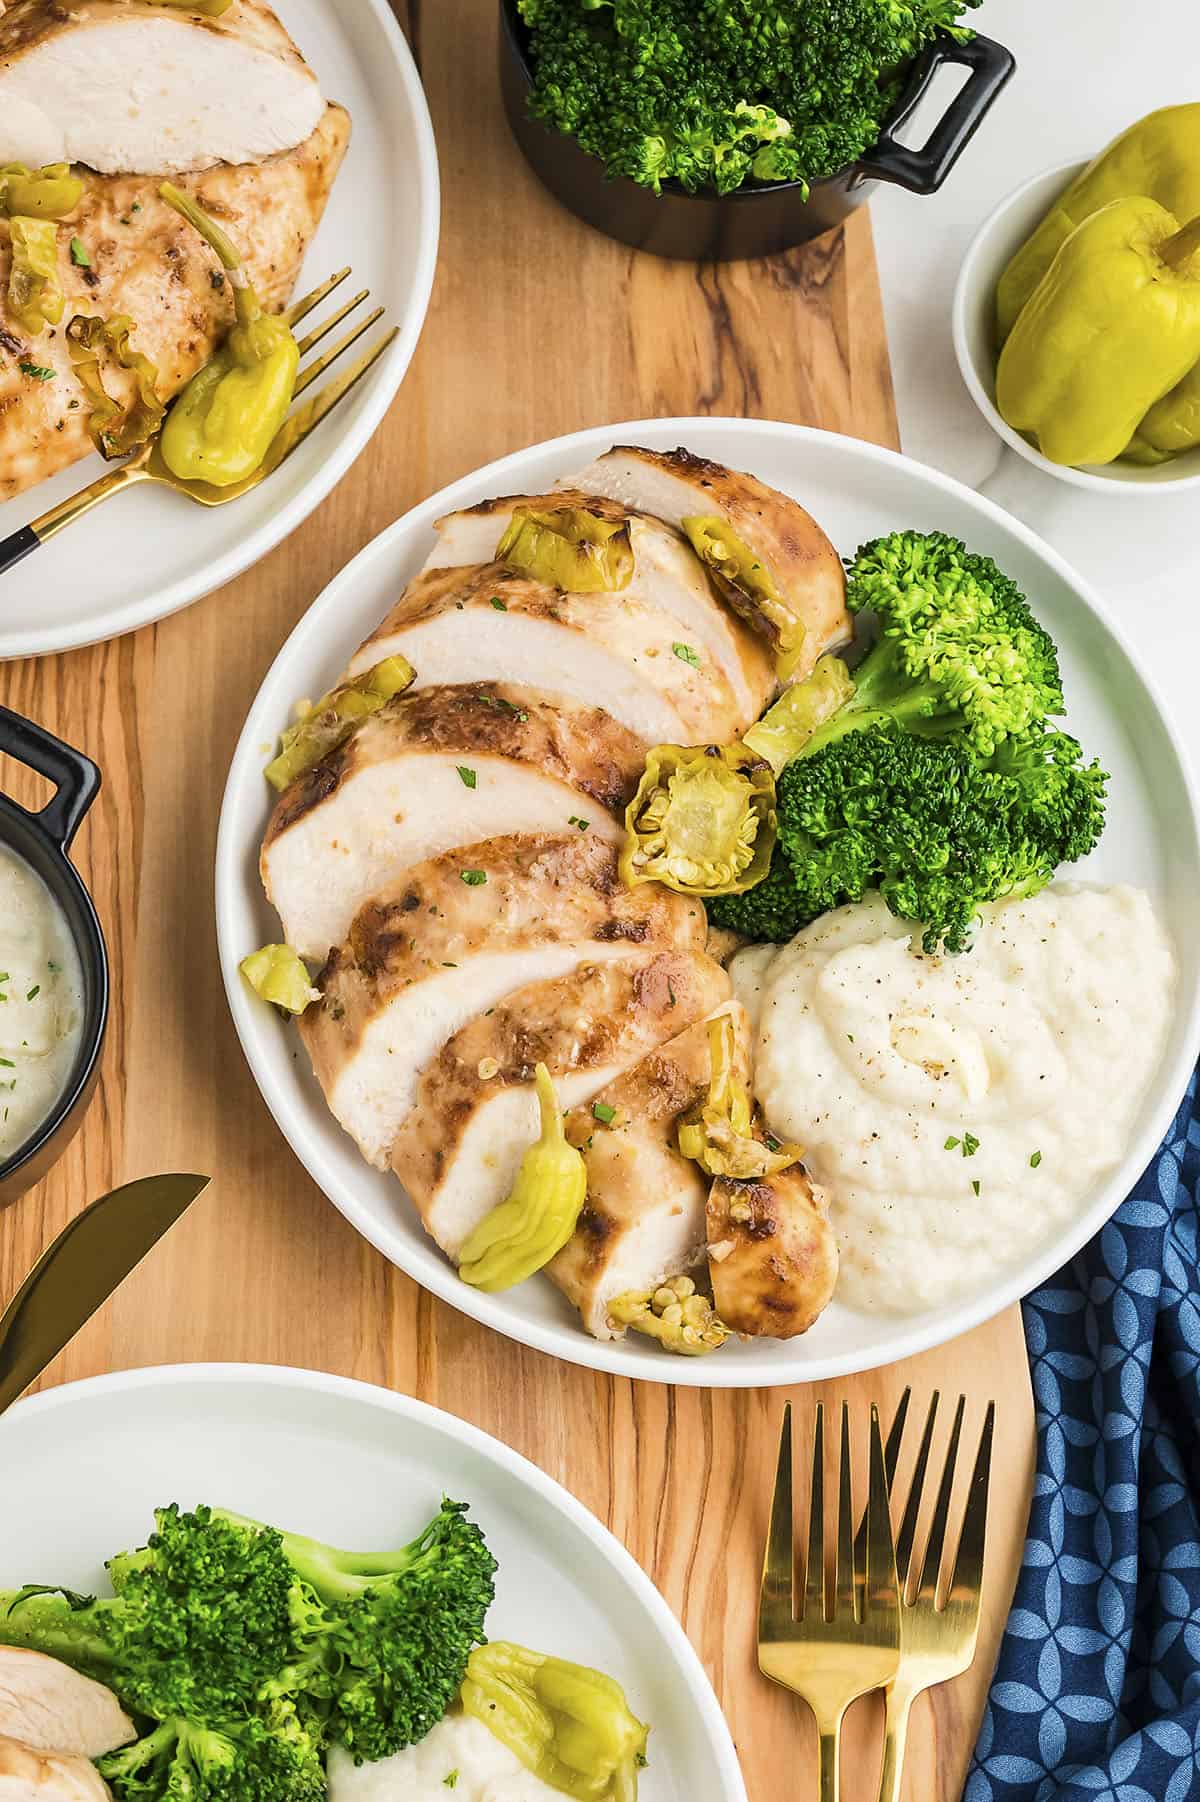 Sliced Mississippi chicken on white plate with mashed cauliflower and steamed broccoli.